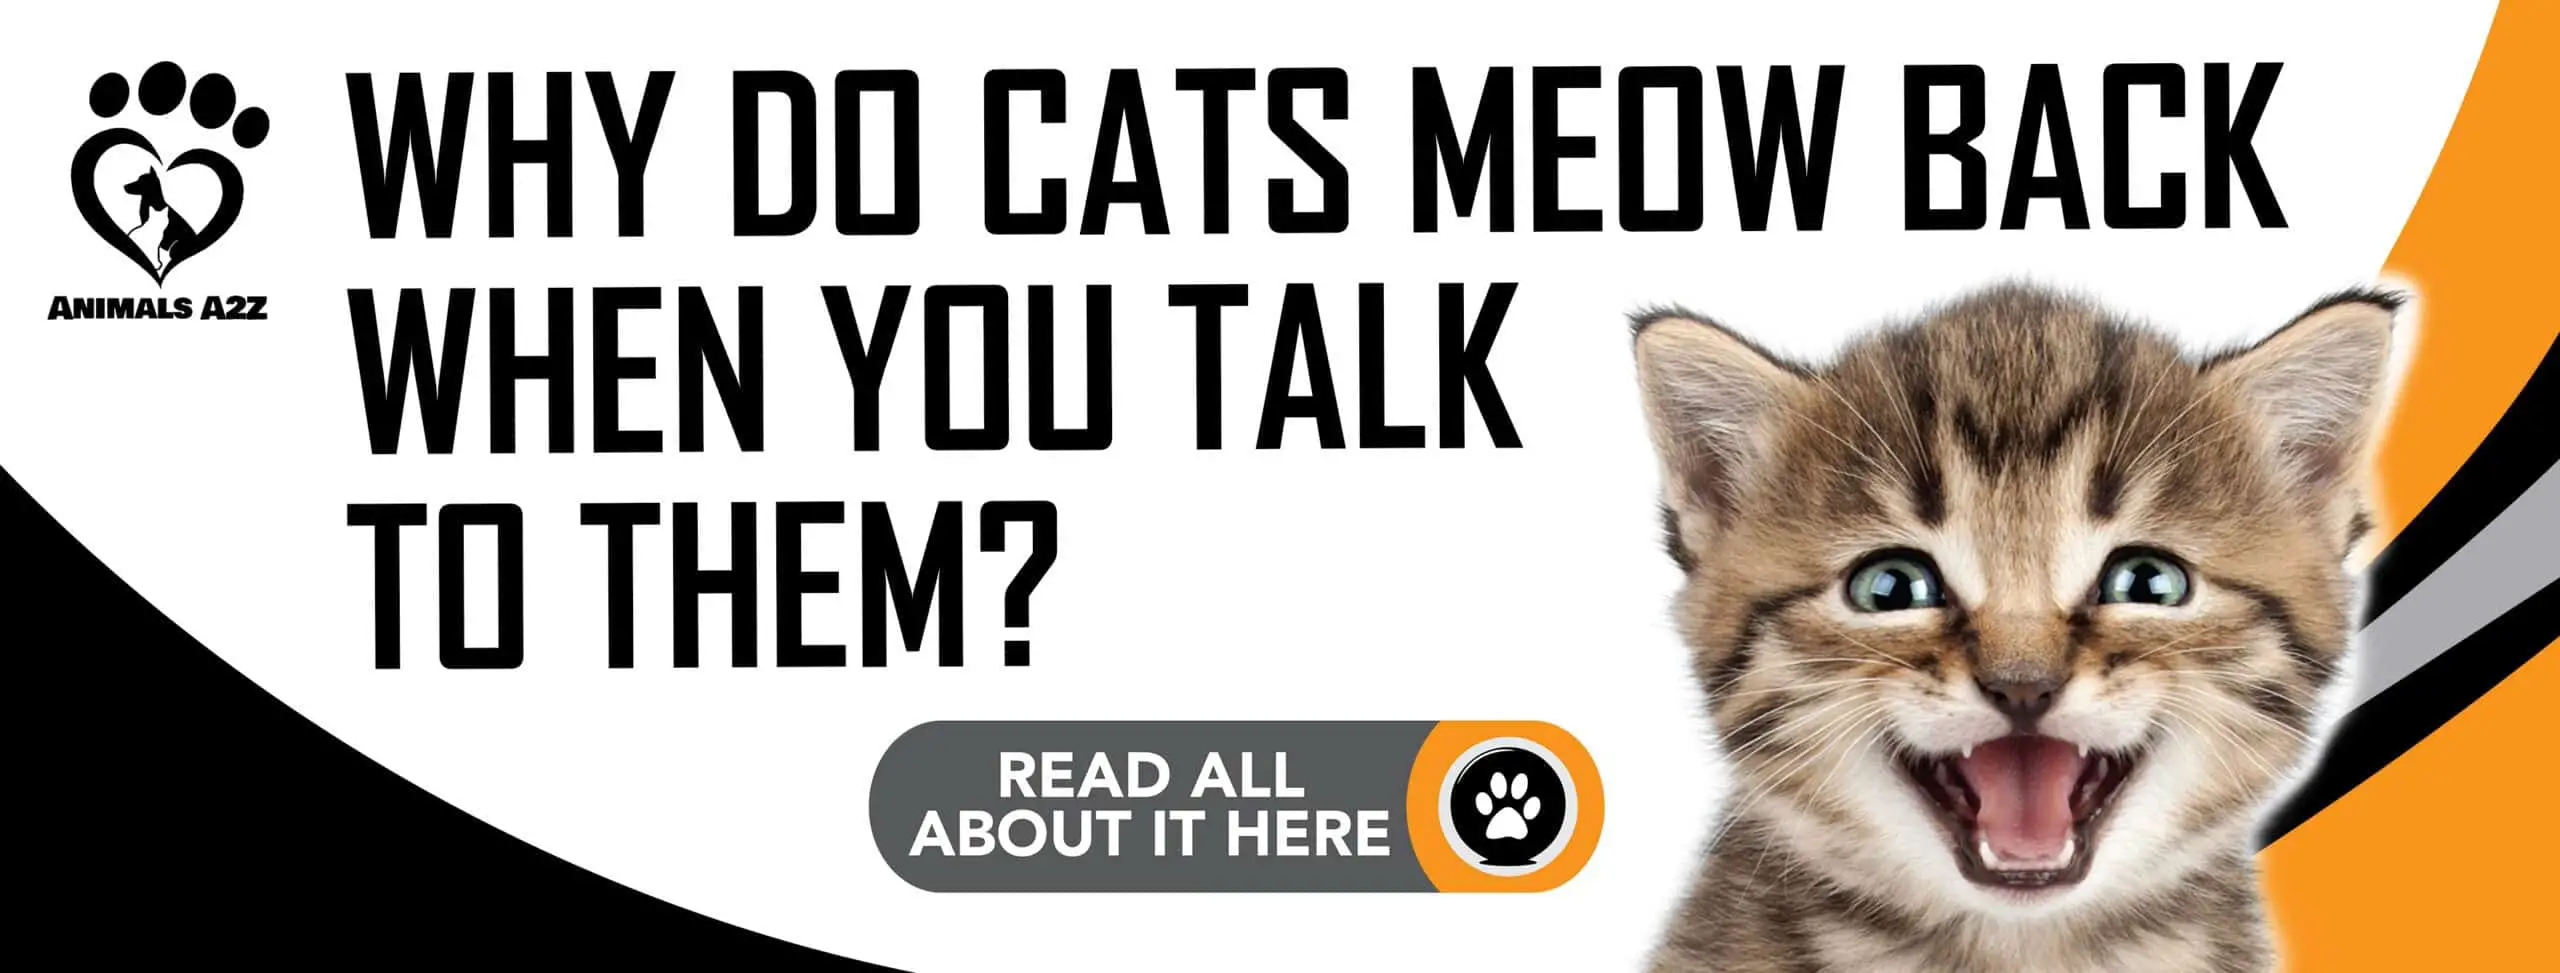 Why do cats meow back when you talk to them